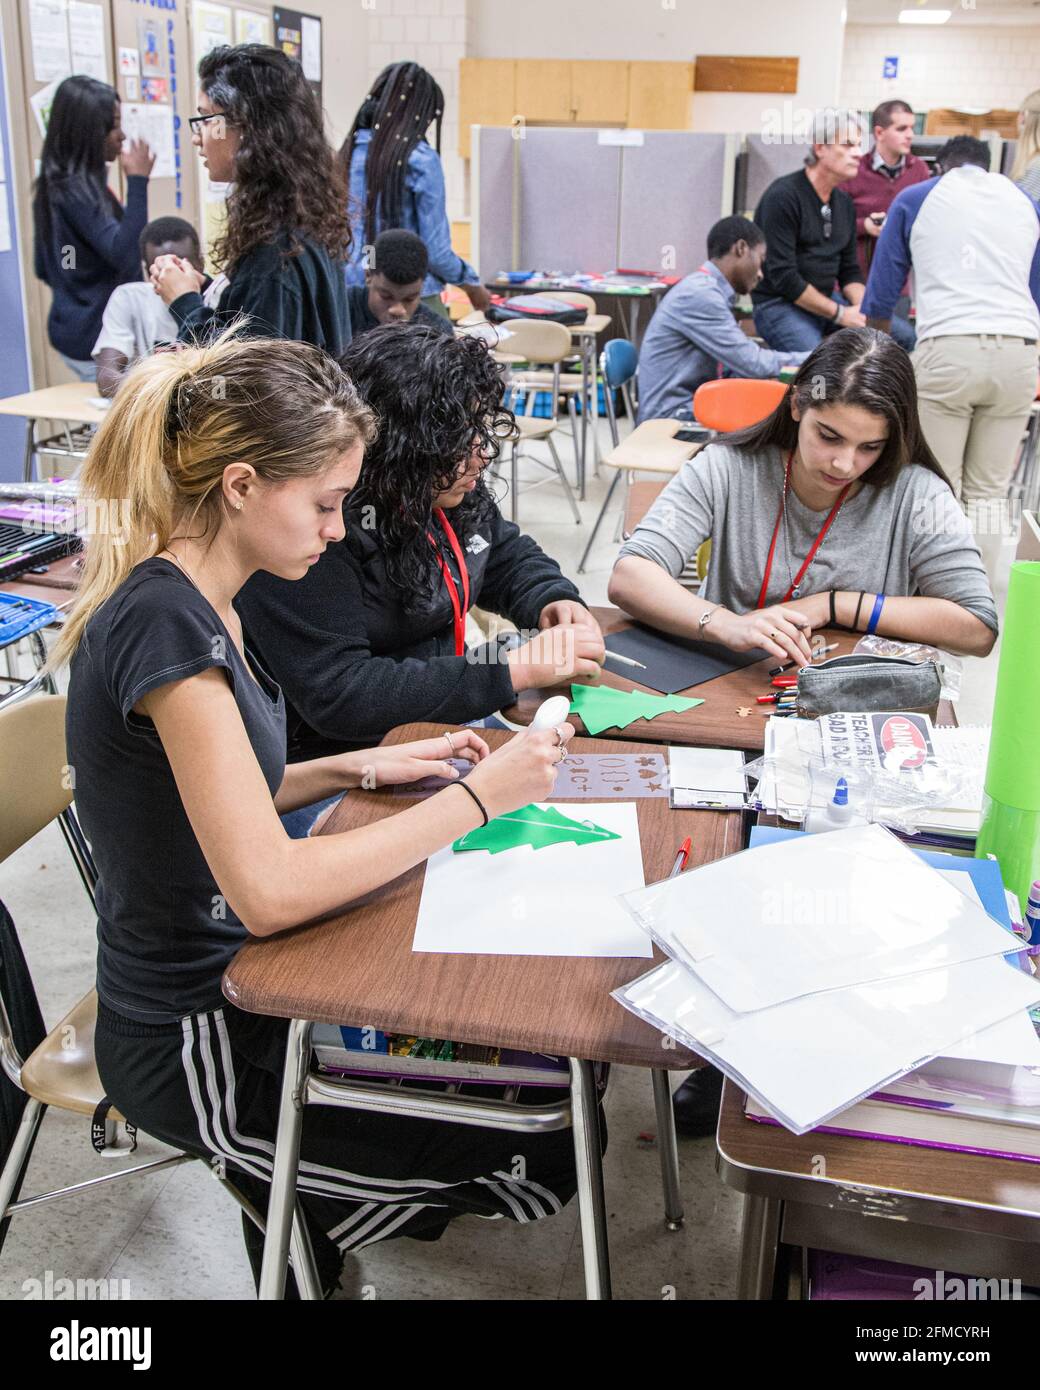 High school students working together in the classroom Stock Photo